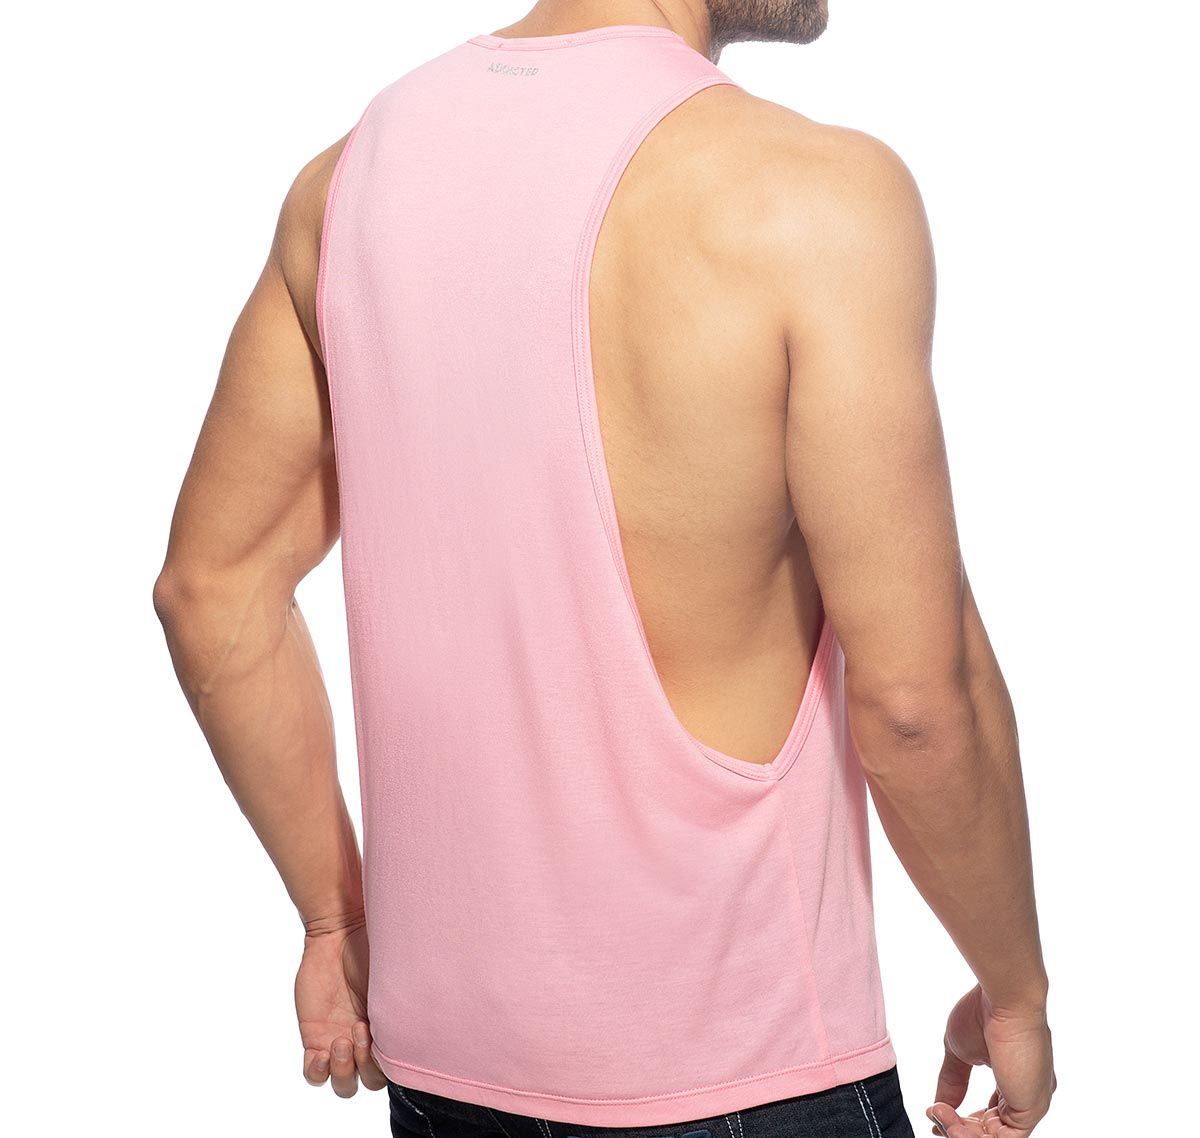 Addicted Tank Top AD LOW RIDER AD043, pink